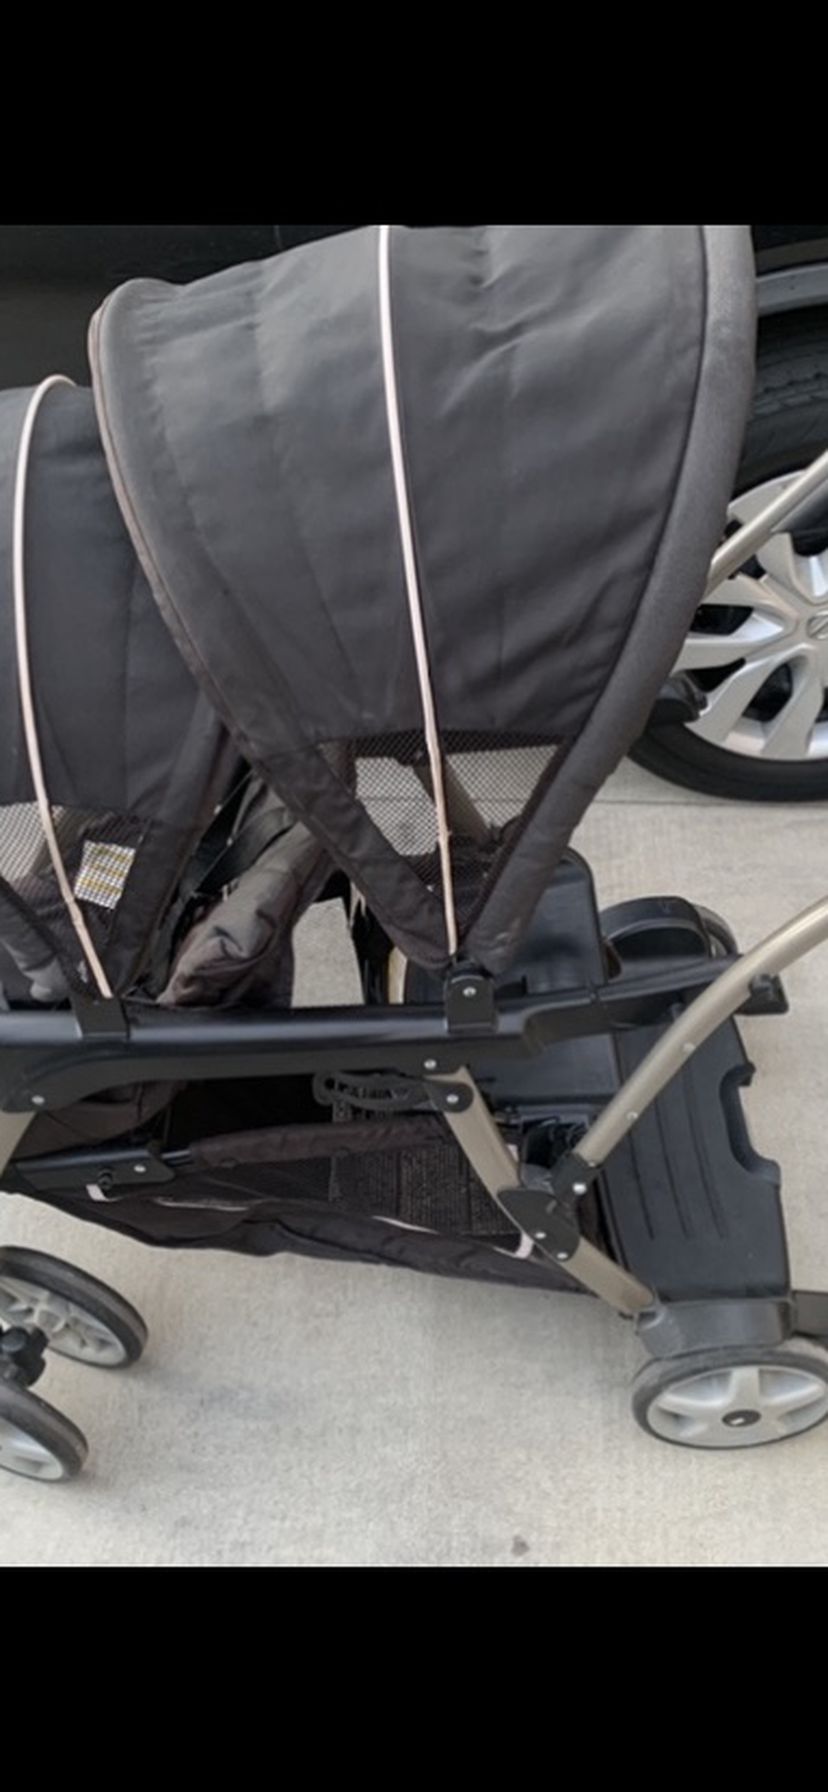 Selling Graco Duo Stroller Black Color